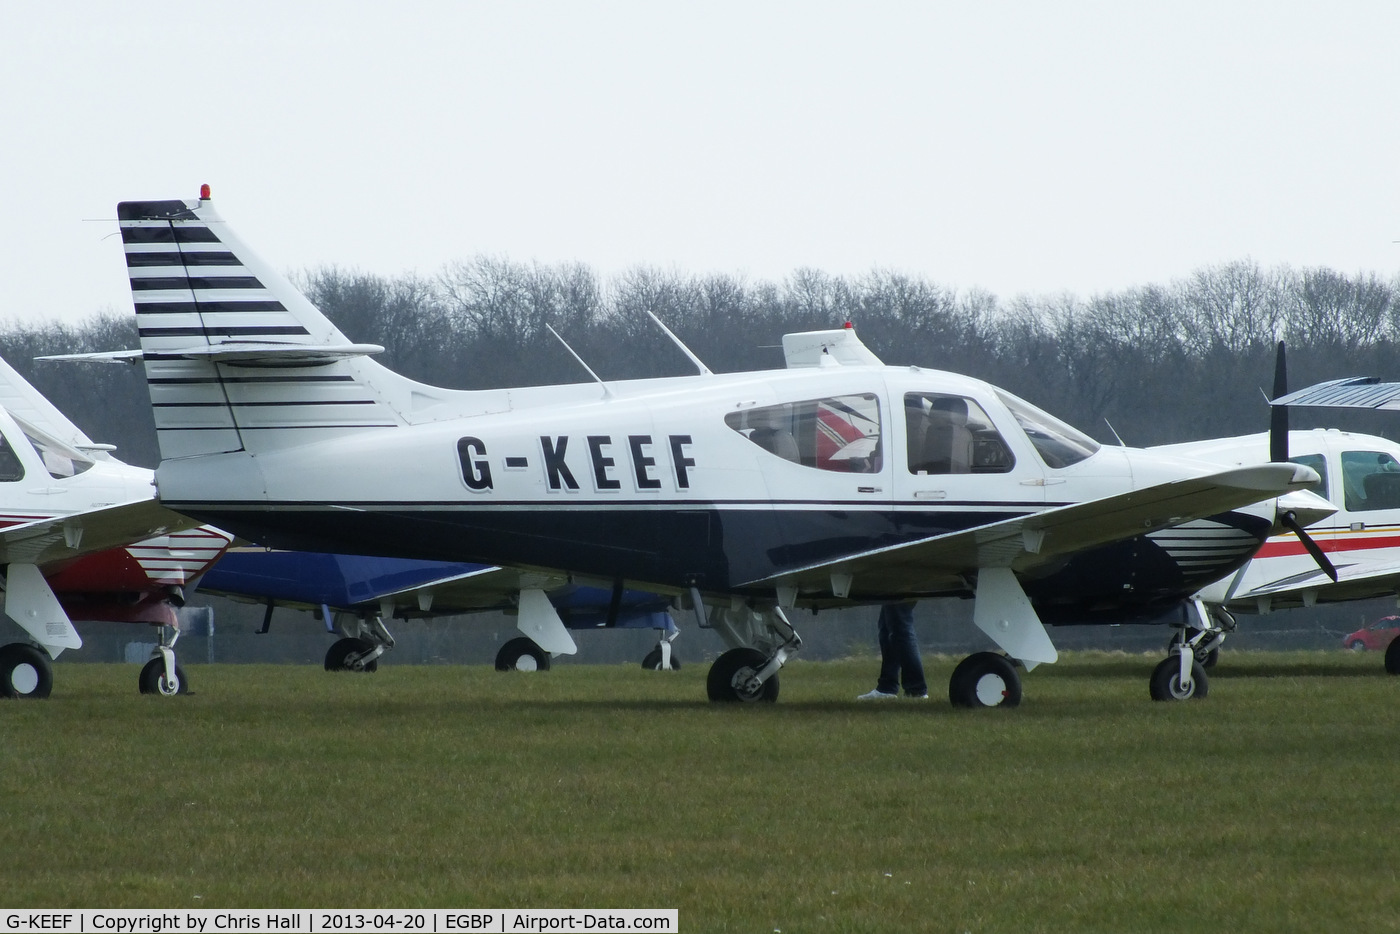 G-KEEF, 1994 Rockwell Commander 114B C/N 14610, visitor to the Rockwell Commander fly-in at Kemble